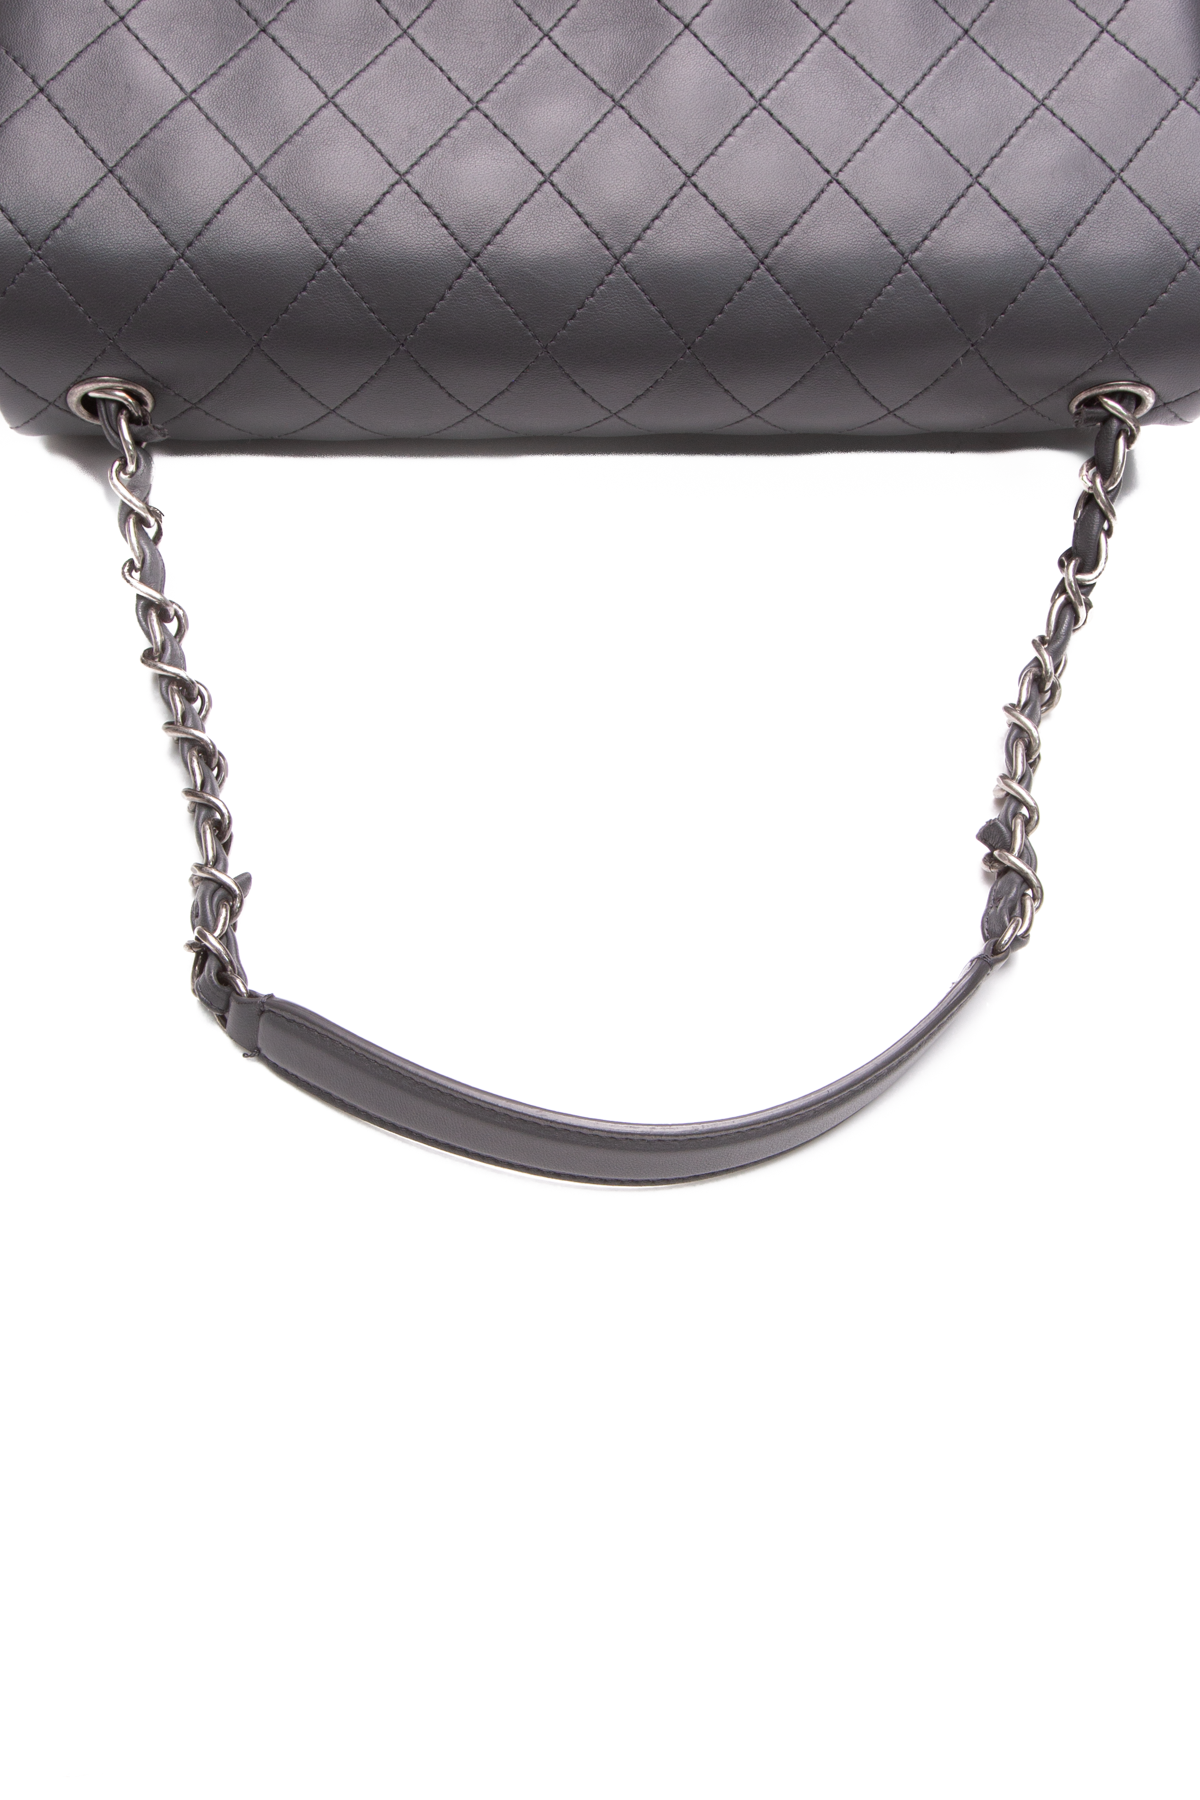 Chanel Black Quilted Lambskin Paris Limited Edition Double Flap Bag Chanel  | The Luxury Closet